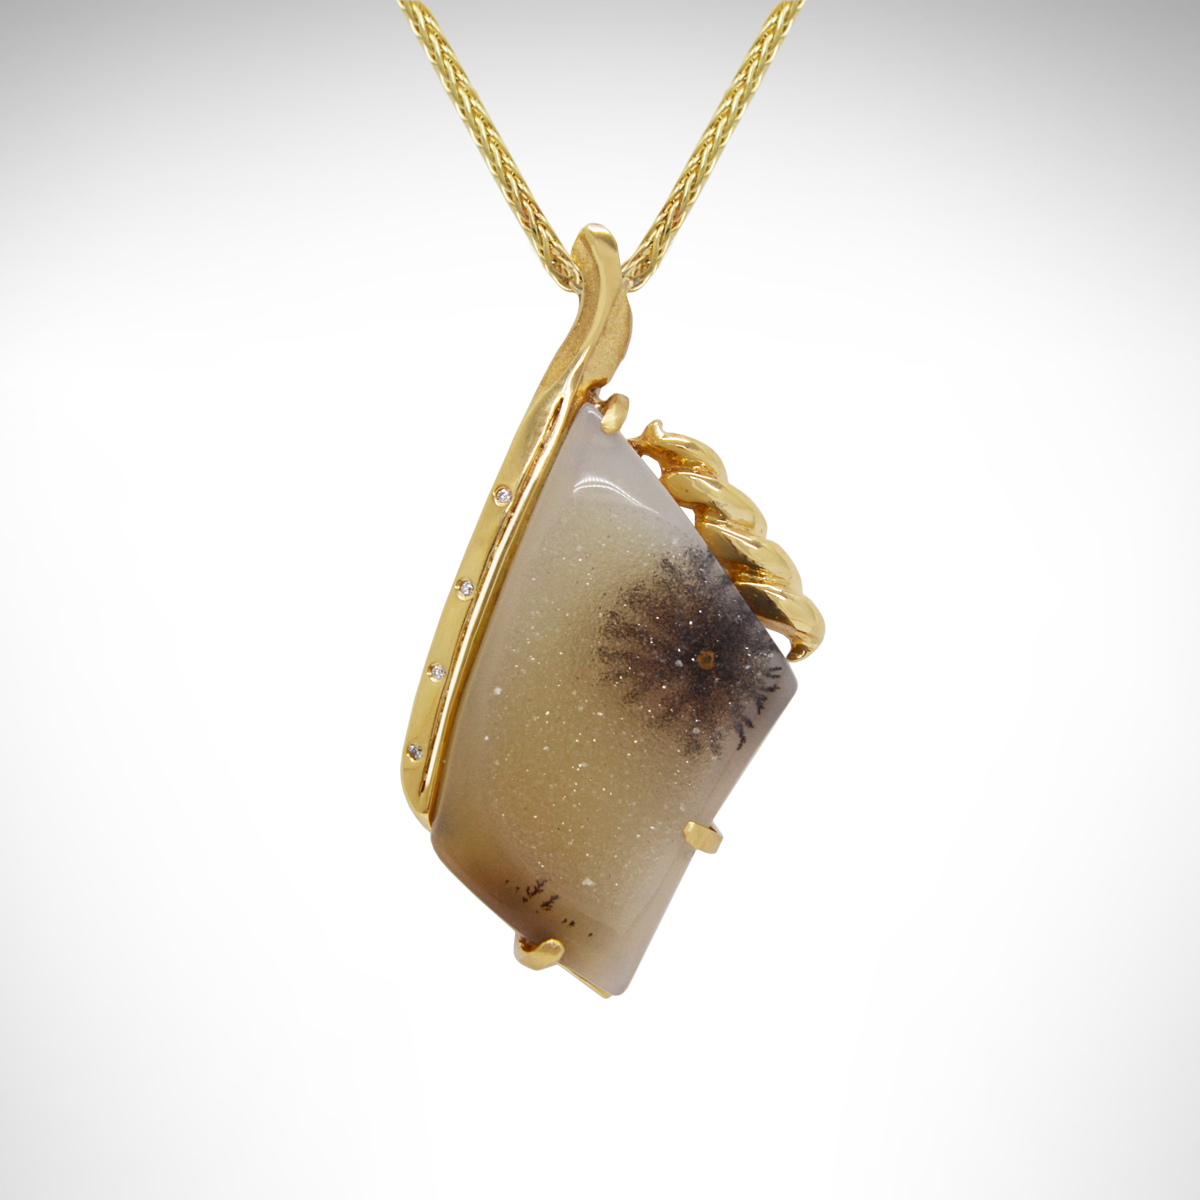 Druzy necklace in 14k yellow gold with dendritic inclusion and diamonds custom designed by morgan's treasure